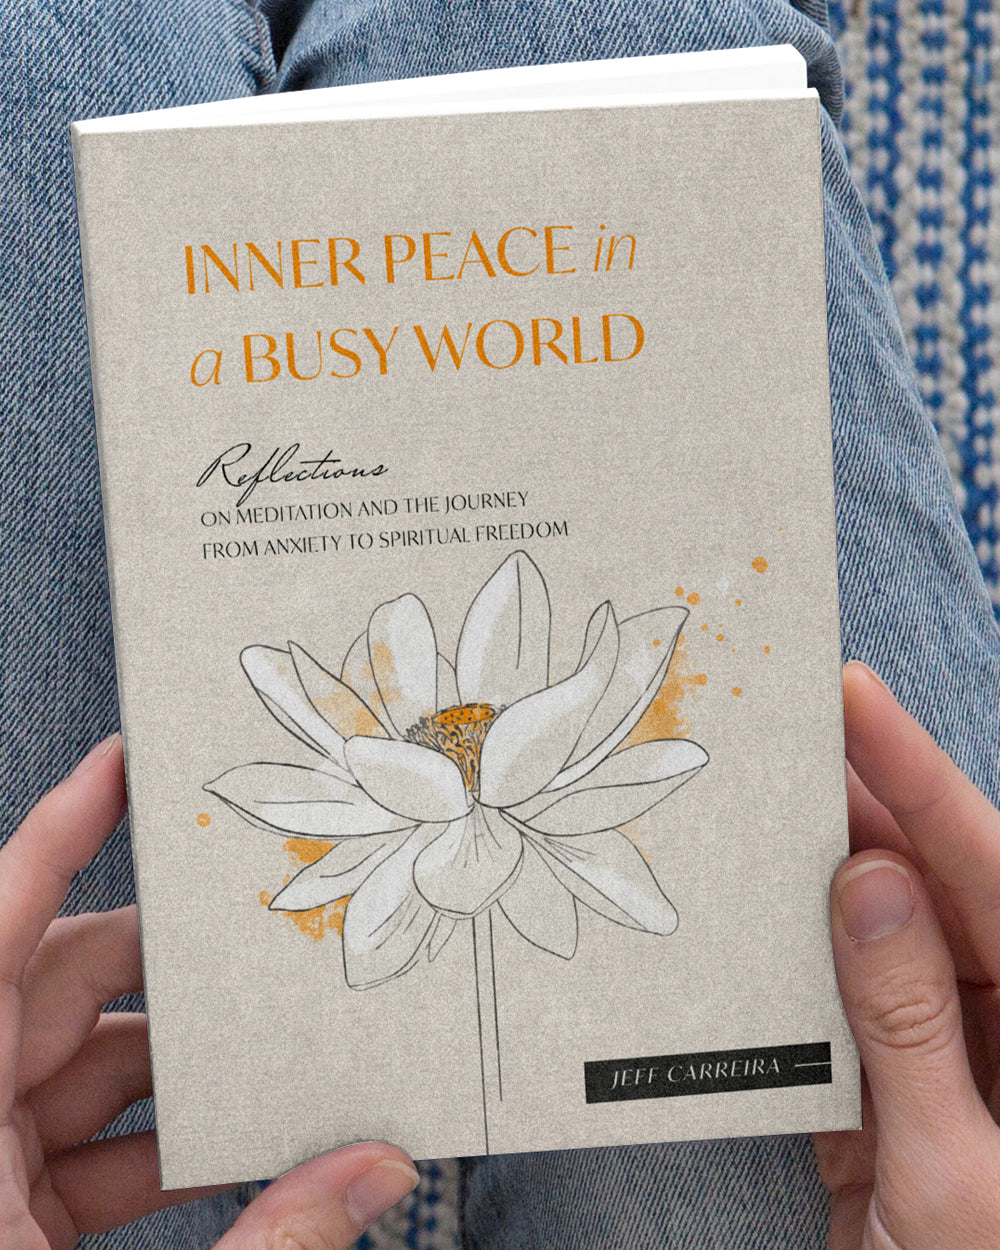 Inner Peace in a Busy World: Reflections on Meditation and the Journey from Anxiety to Spiritual Freedom